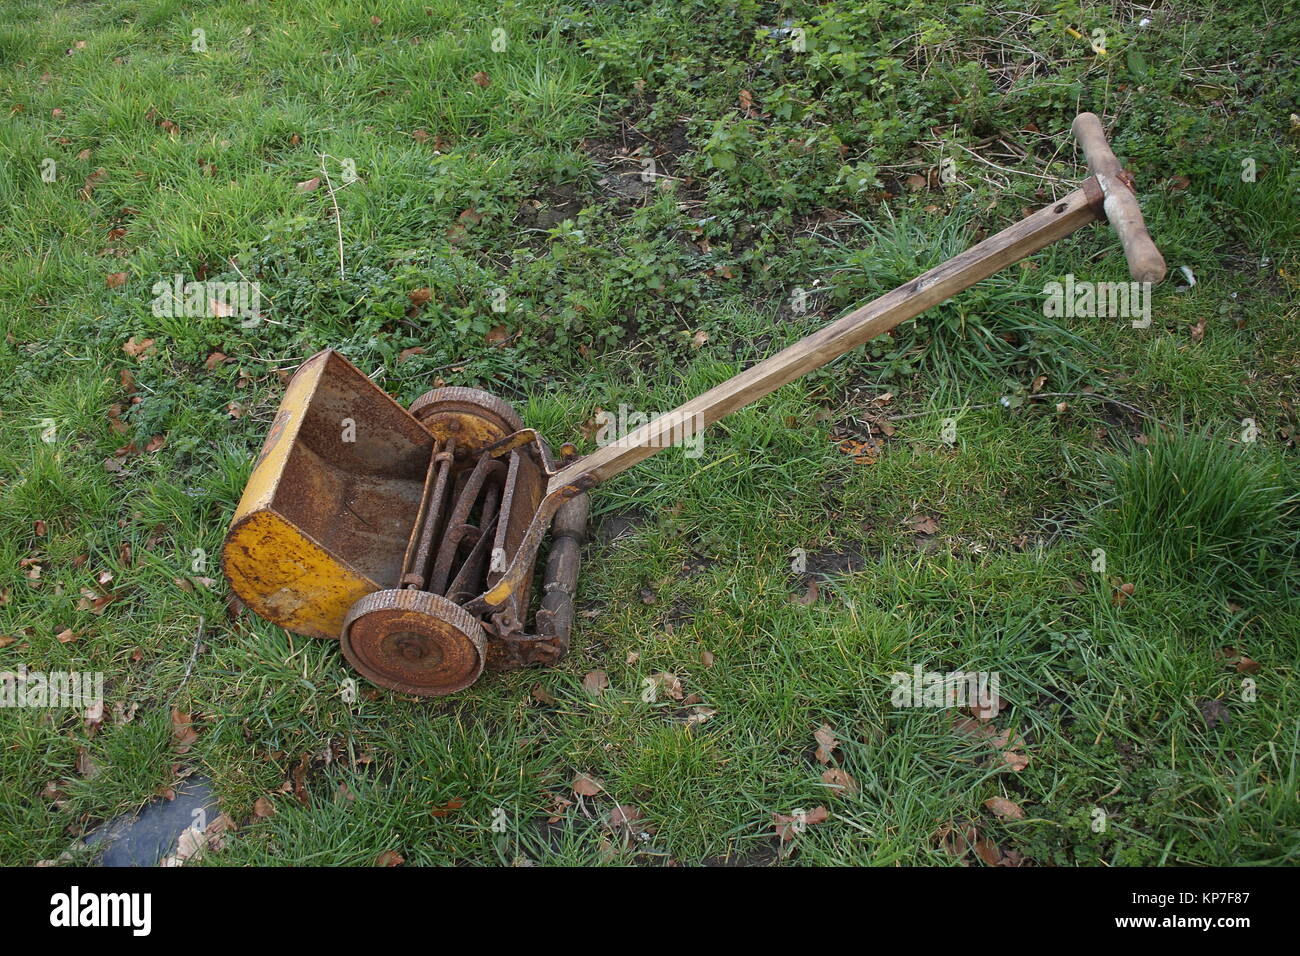 Old Hand push lawn mover, with spindle blade for cutting grass. Stock Photo